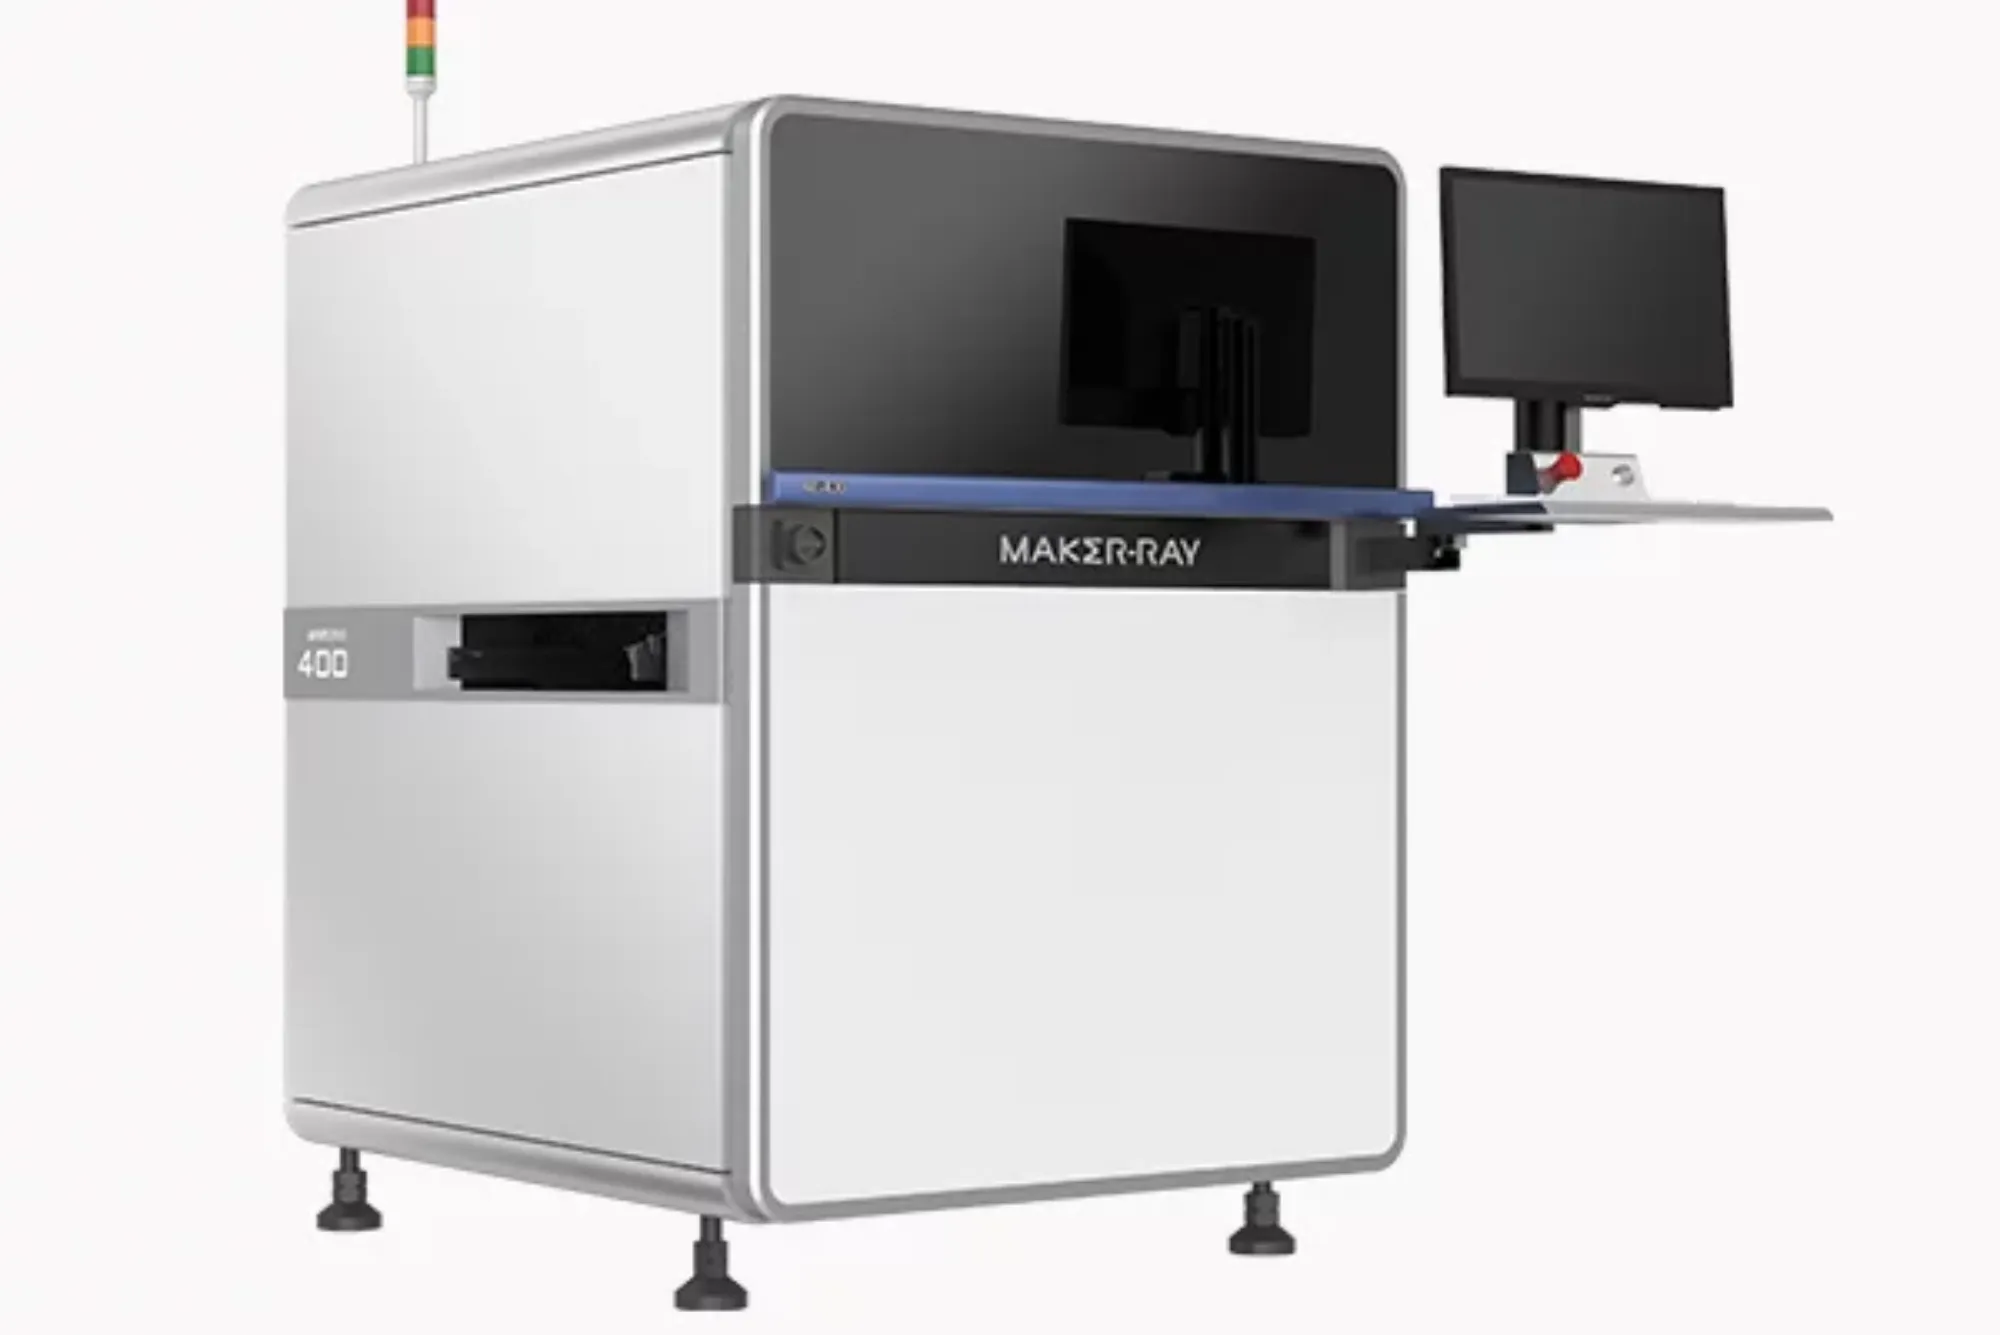 Maker-ray's Automated Optical Inspection Solutions